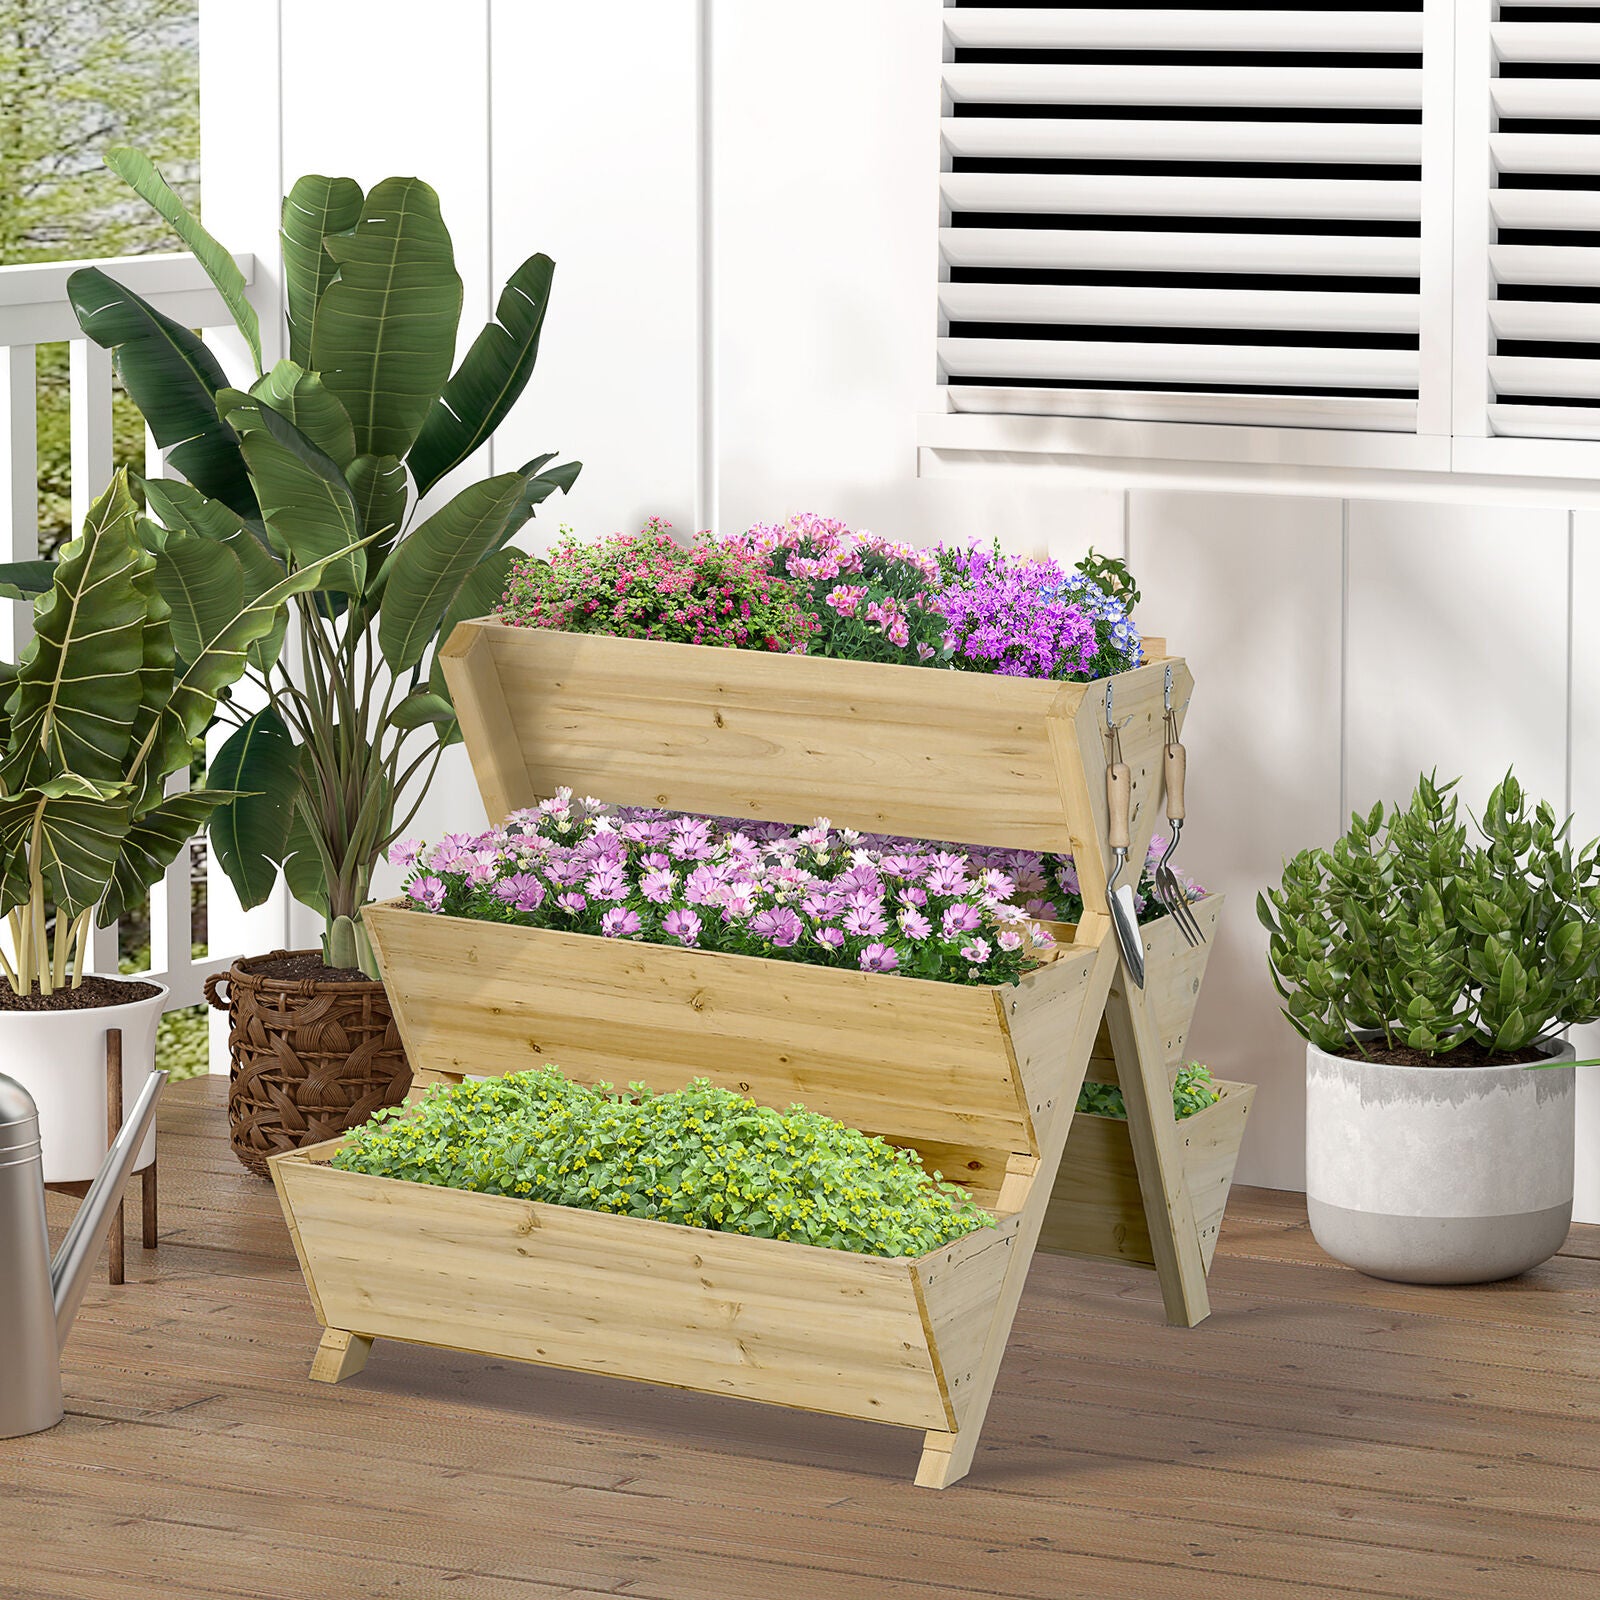 Raised Garden Bed - Freestanding Raised Beds with 5 Planting Boxes